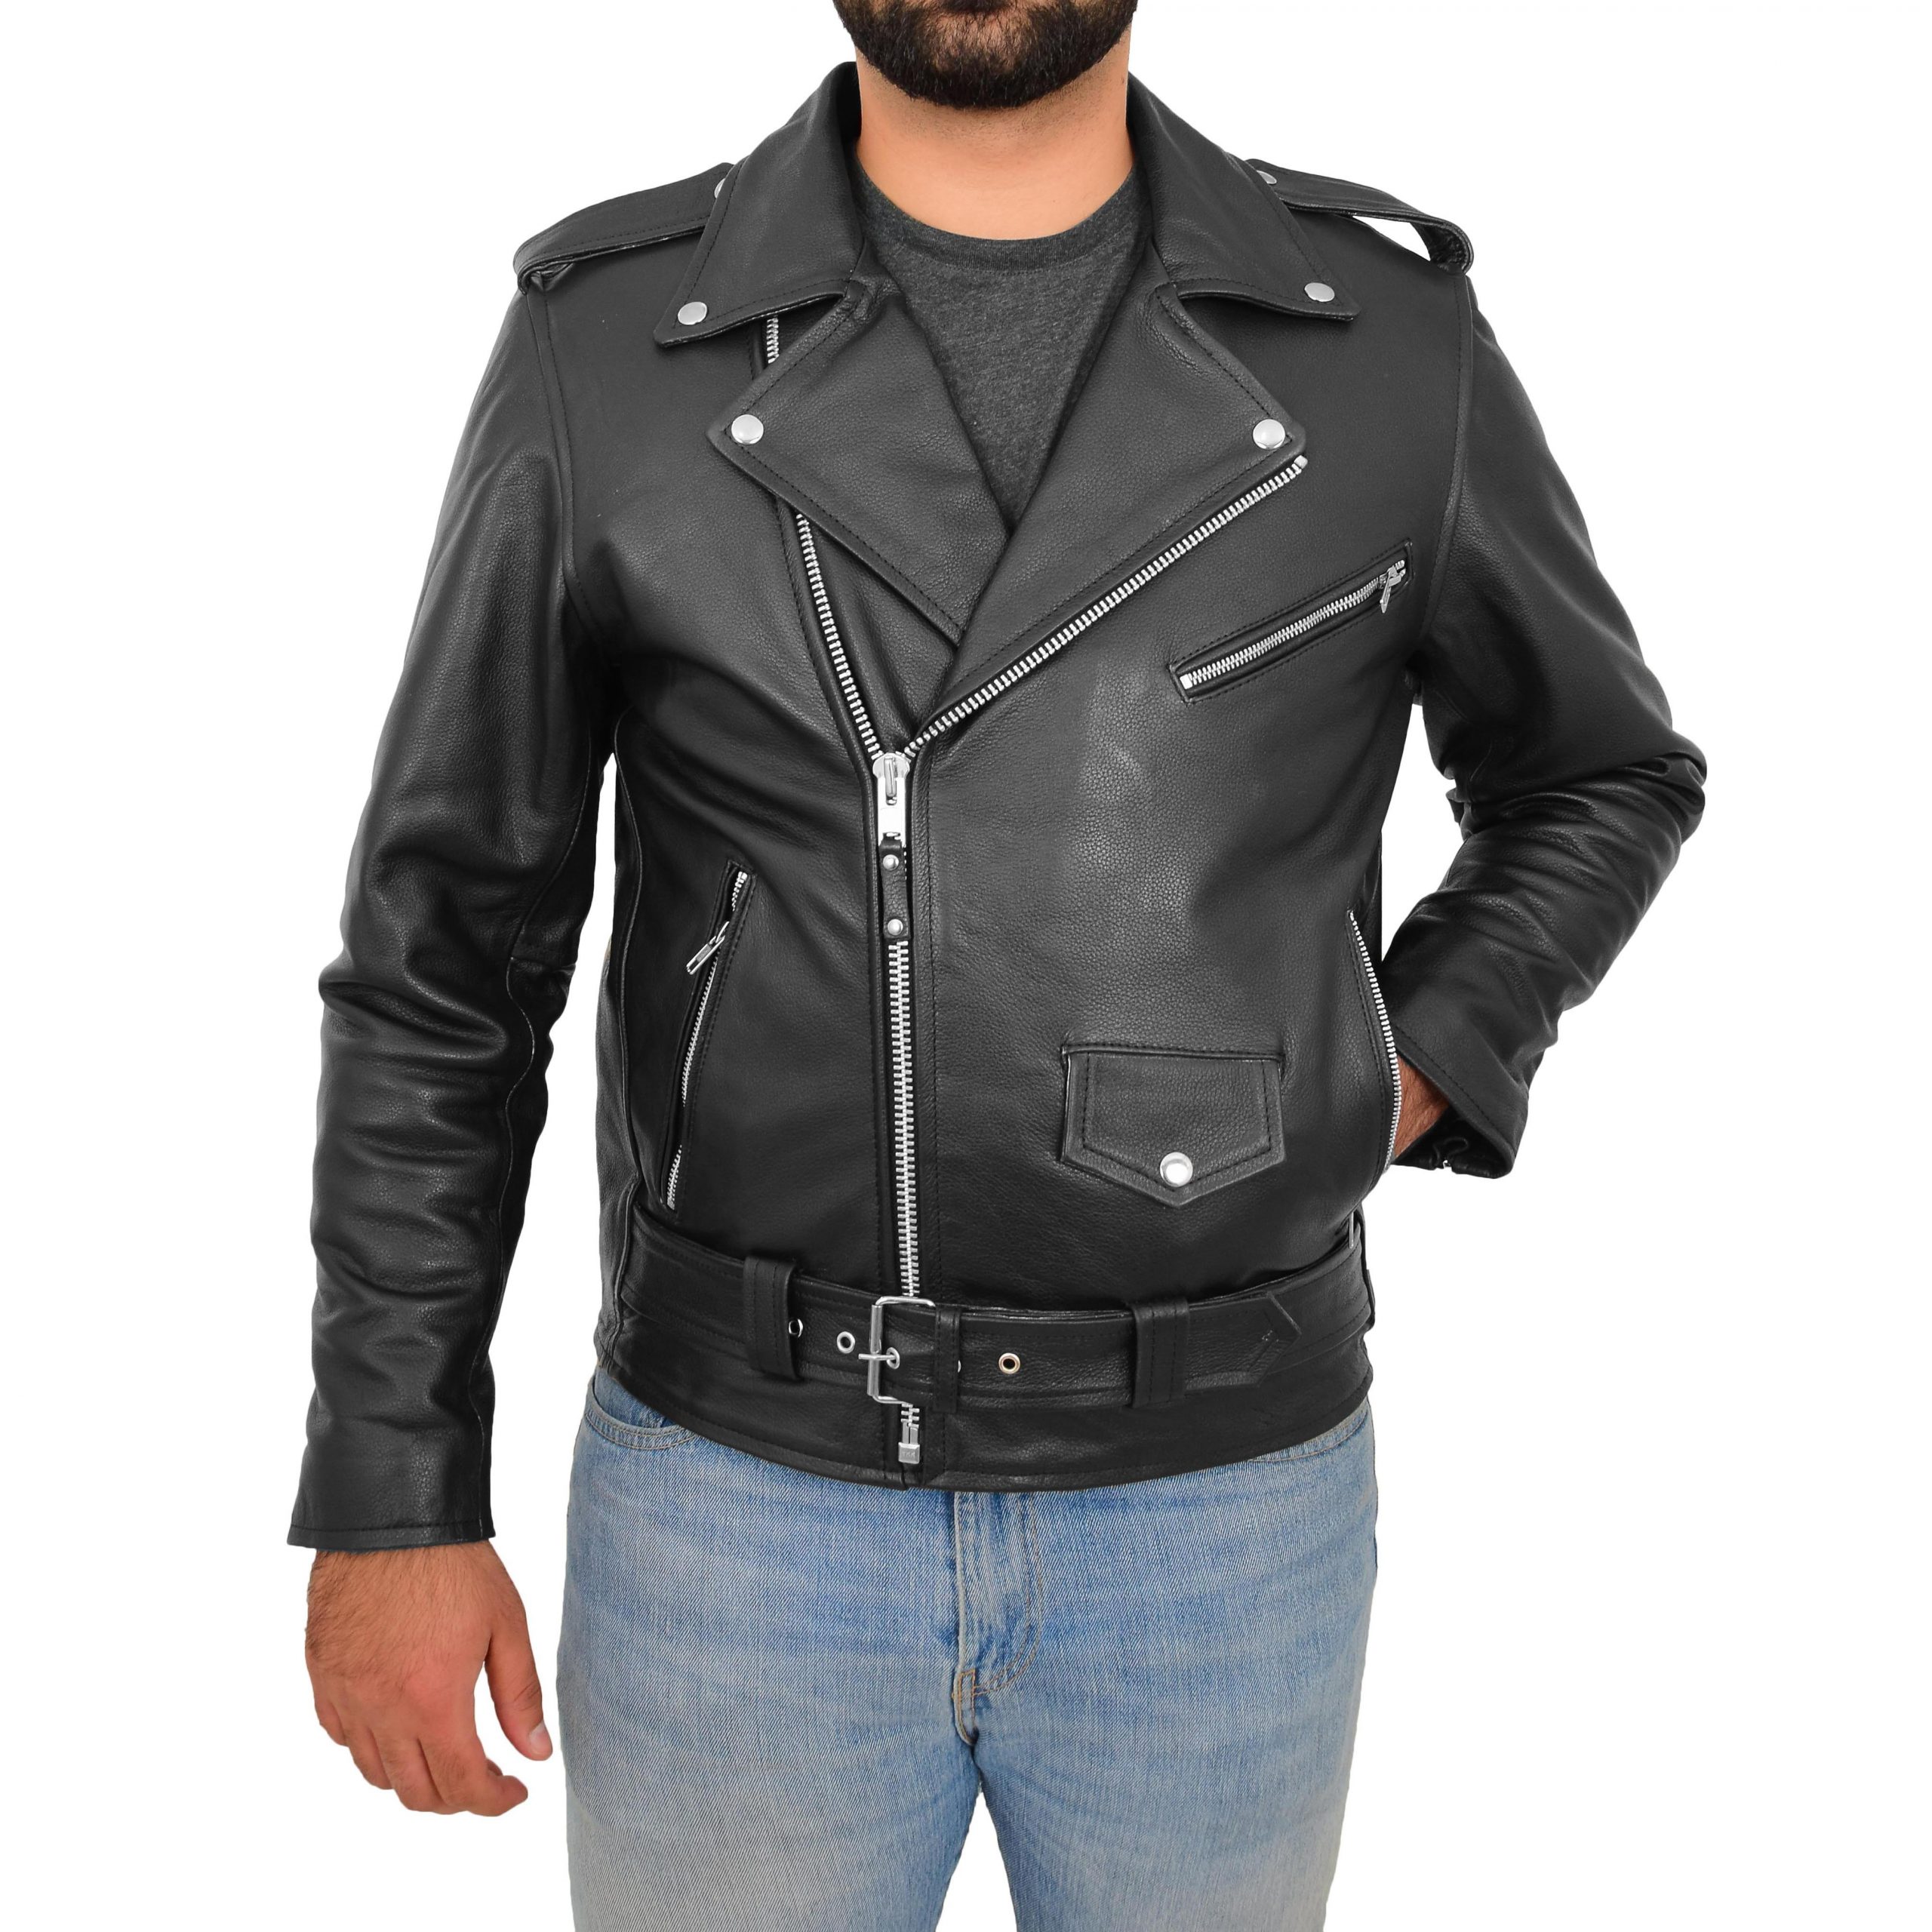 Men's Brando Motorcycle Biker Black Real Thick Leather Jacket Perfect All sizes